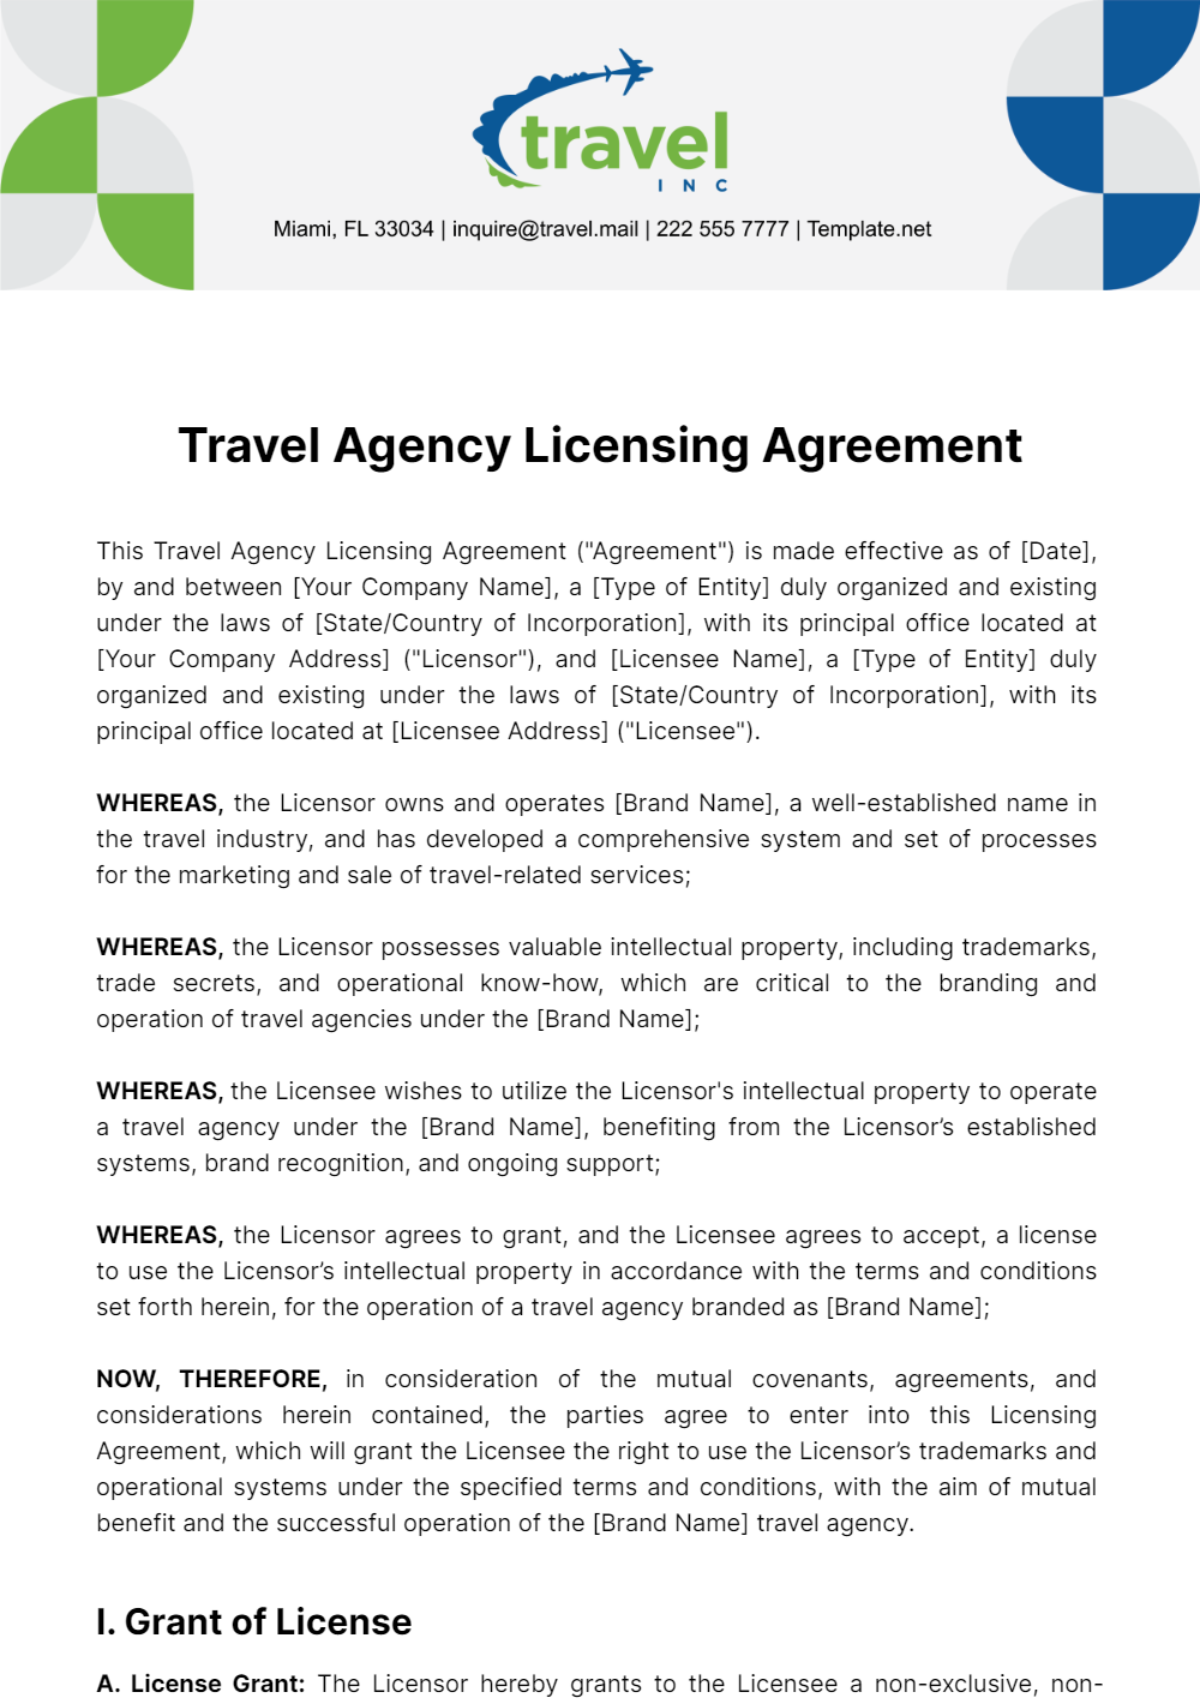 Travel Agency Licensing Agreement Template